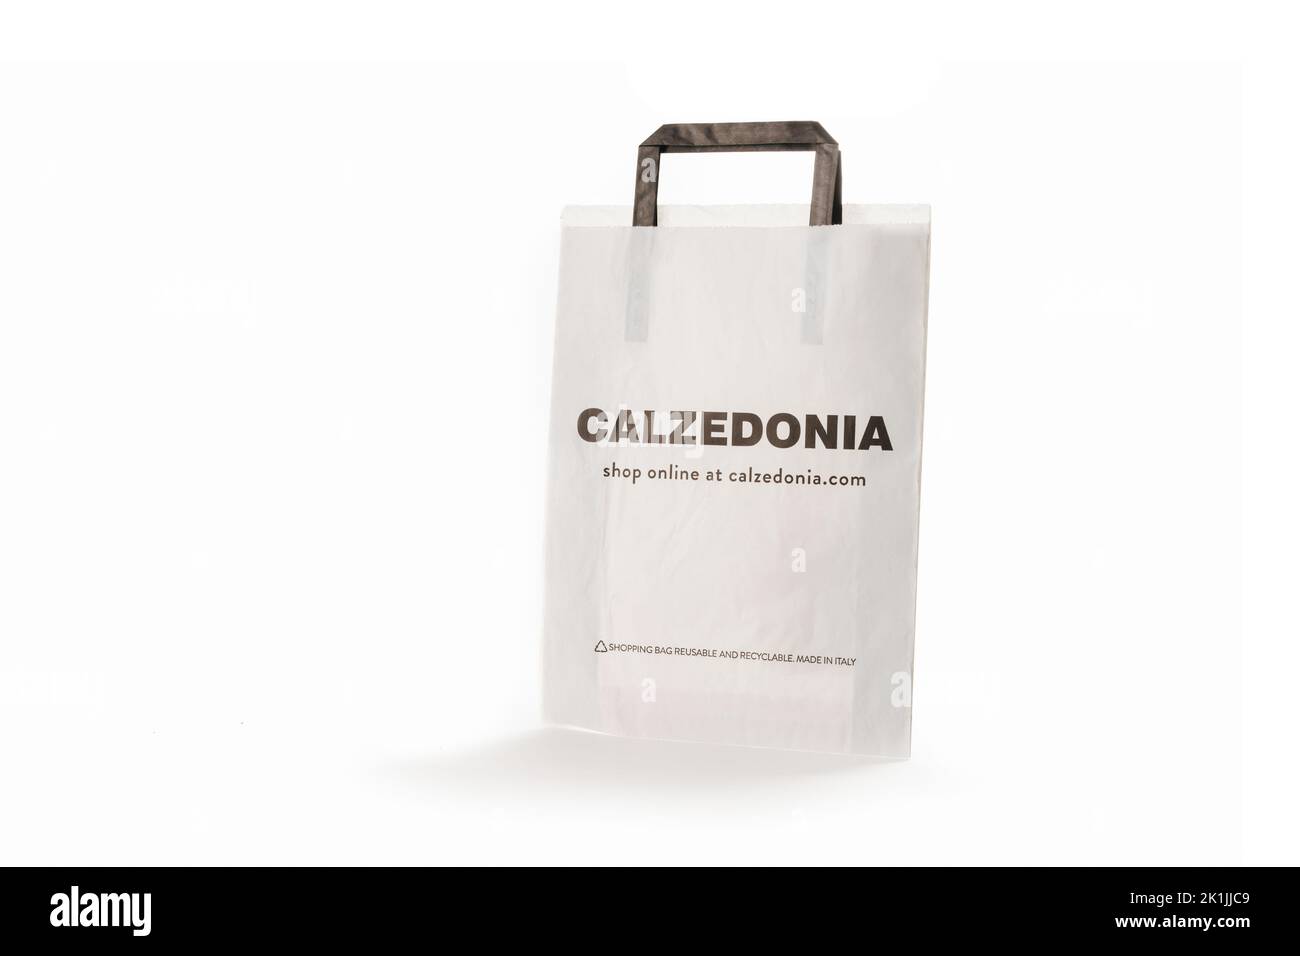 Cyprus, Paphos - SEPTEMBER 08, 2022: Branded paper bag of Calzedonia Italian specialised clothing shop selling bathing suits, tights, and leggings. Ov Stock Photo